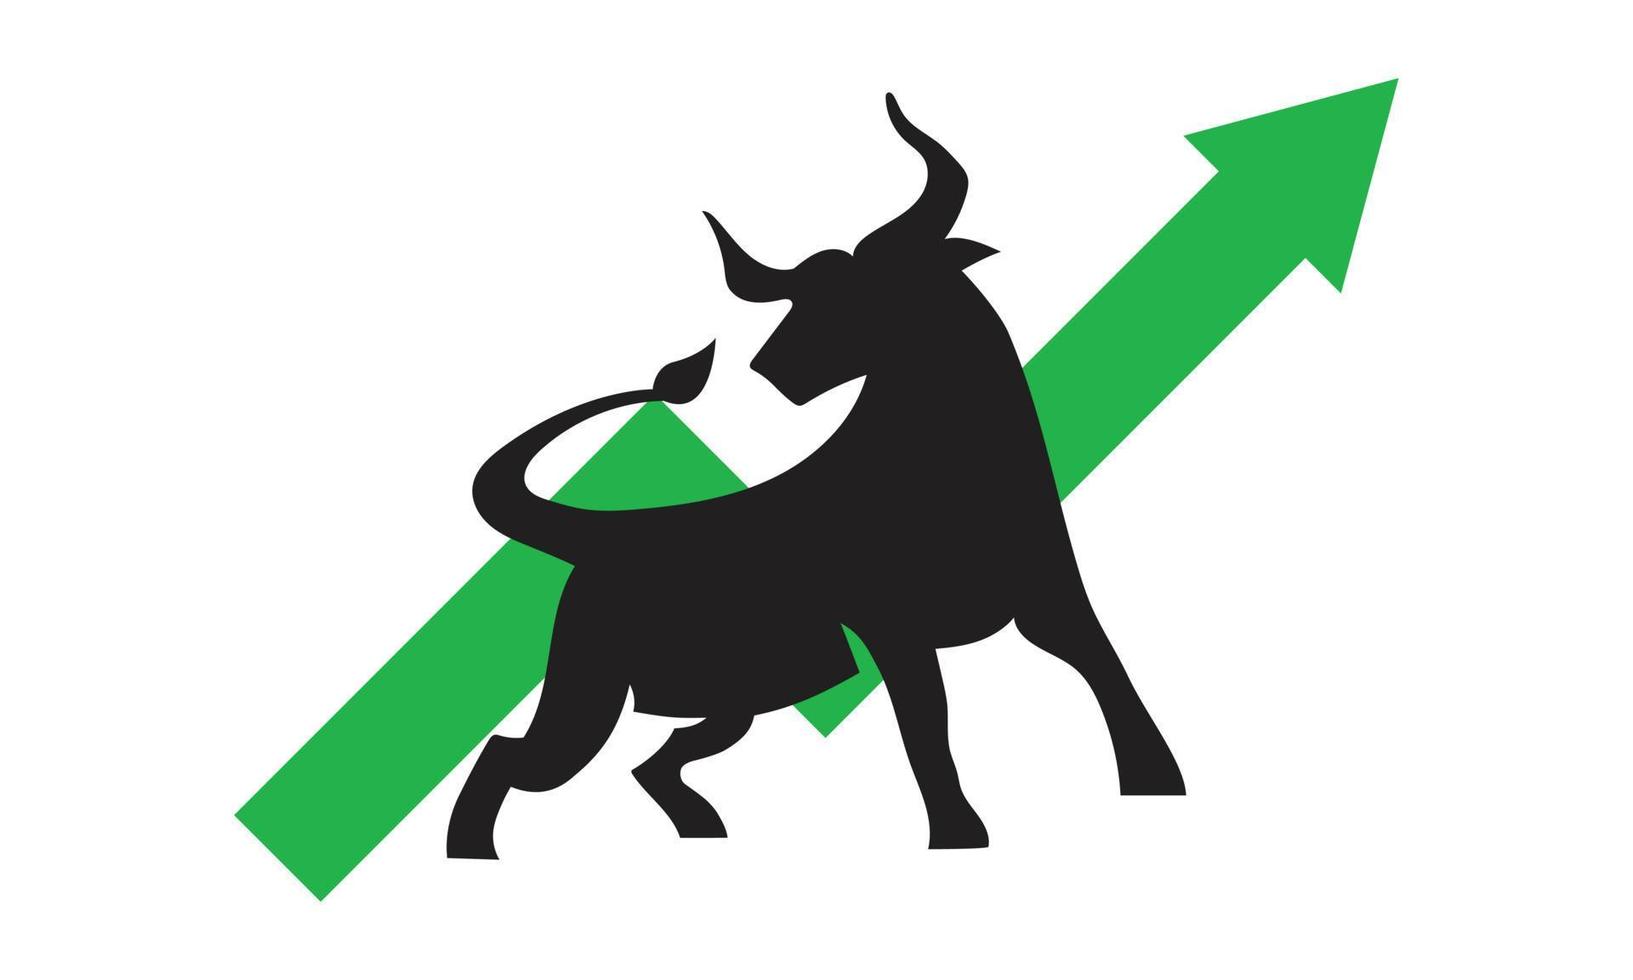 A silhouette of the bull with an increased chart behind for bullish trend illustration vector